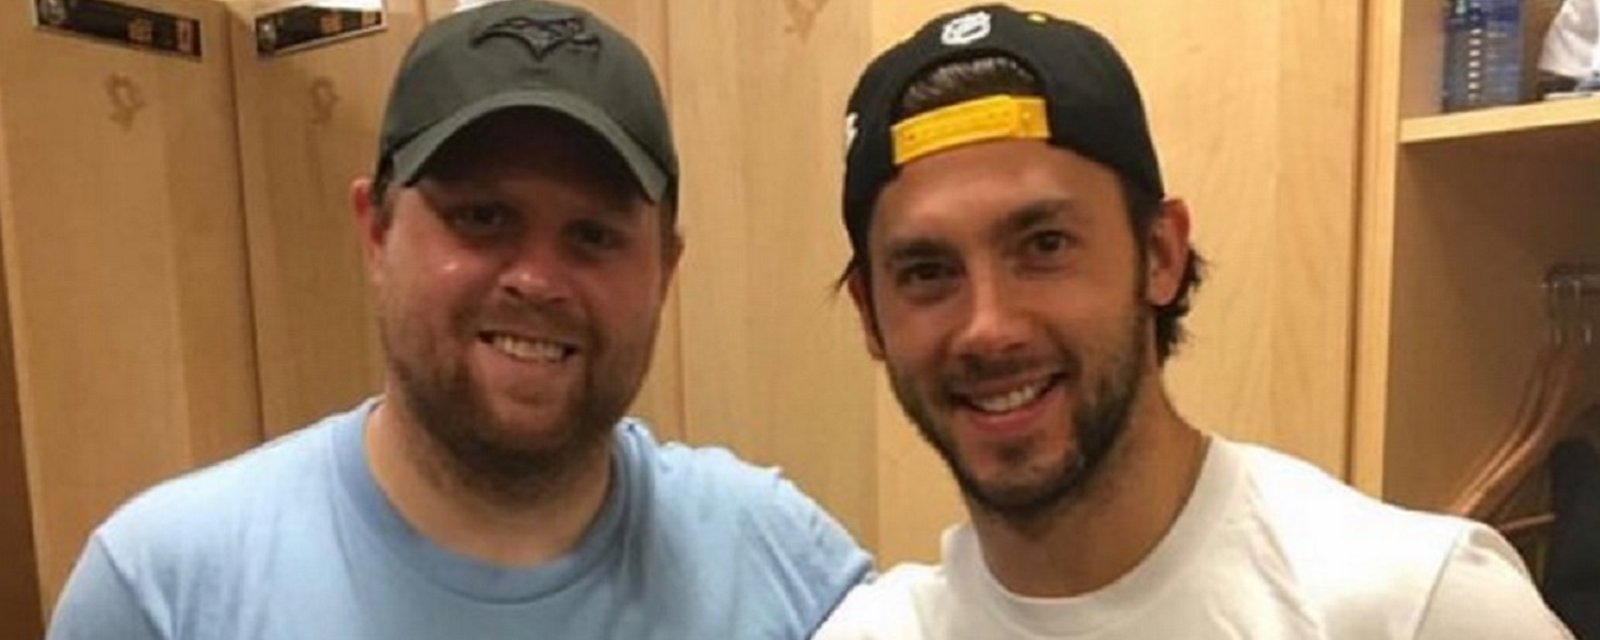 Penguins show off new Phil Kessel for President shirts.